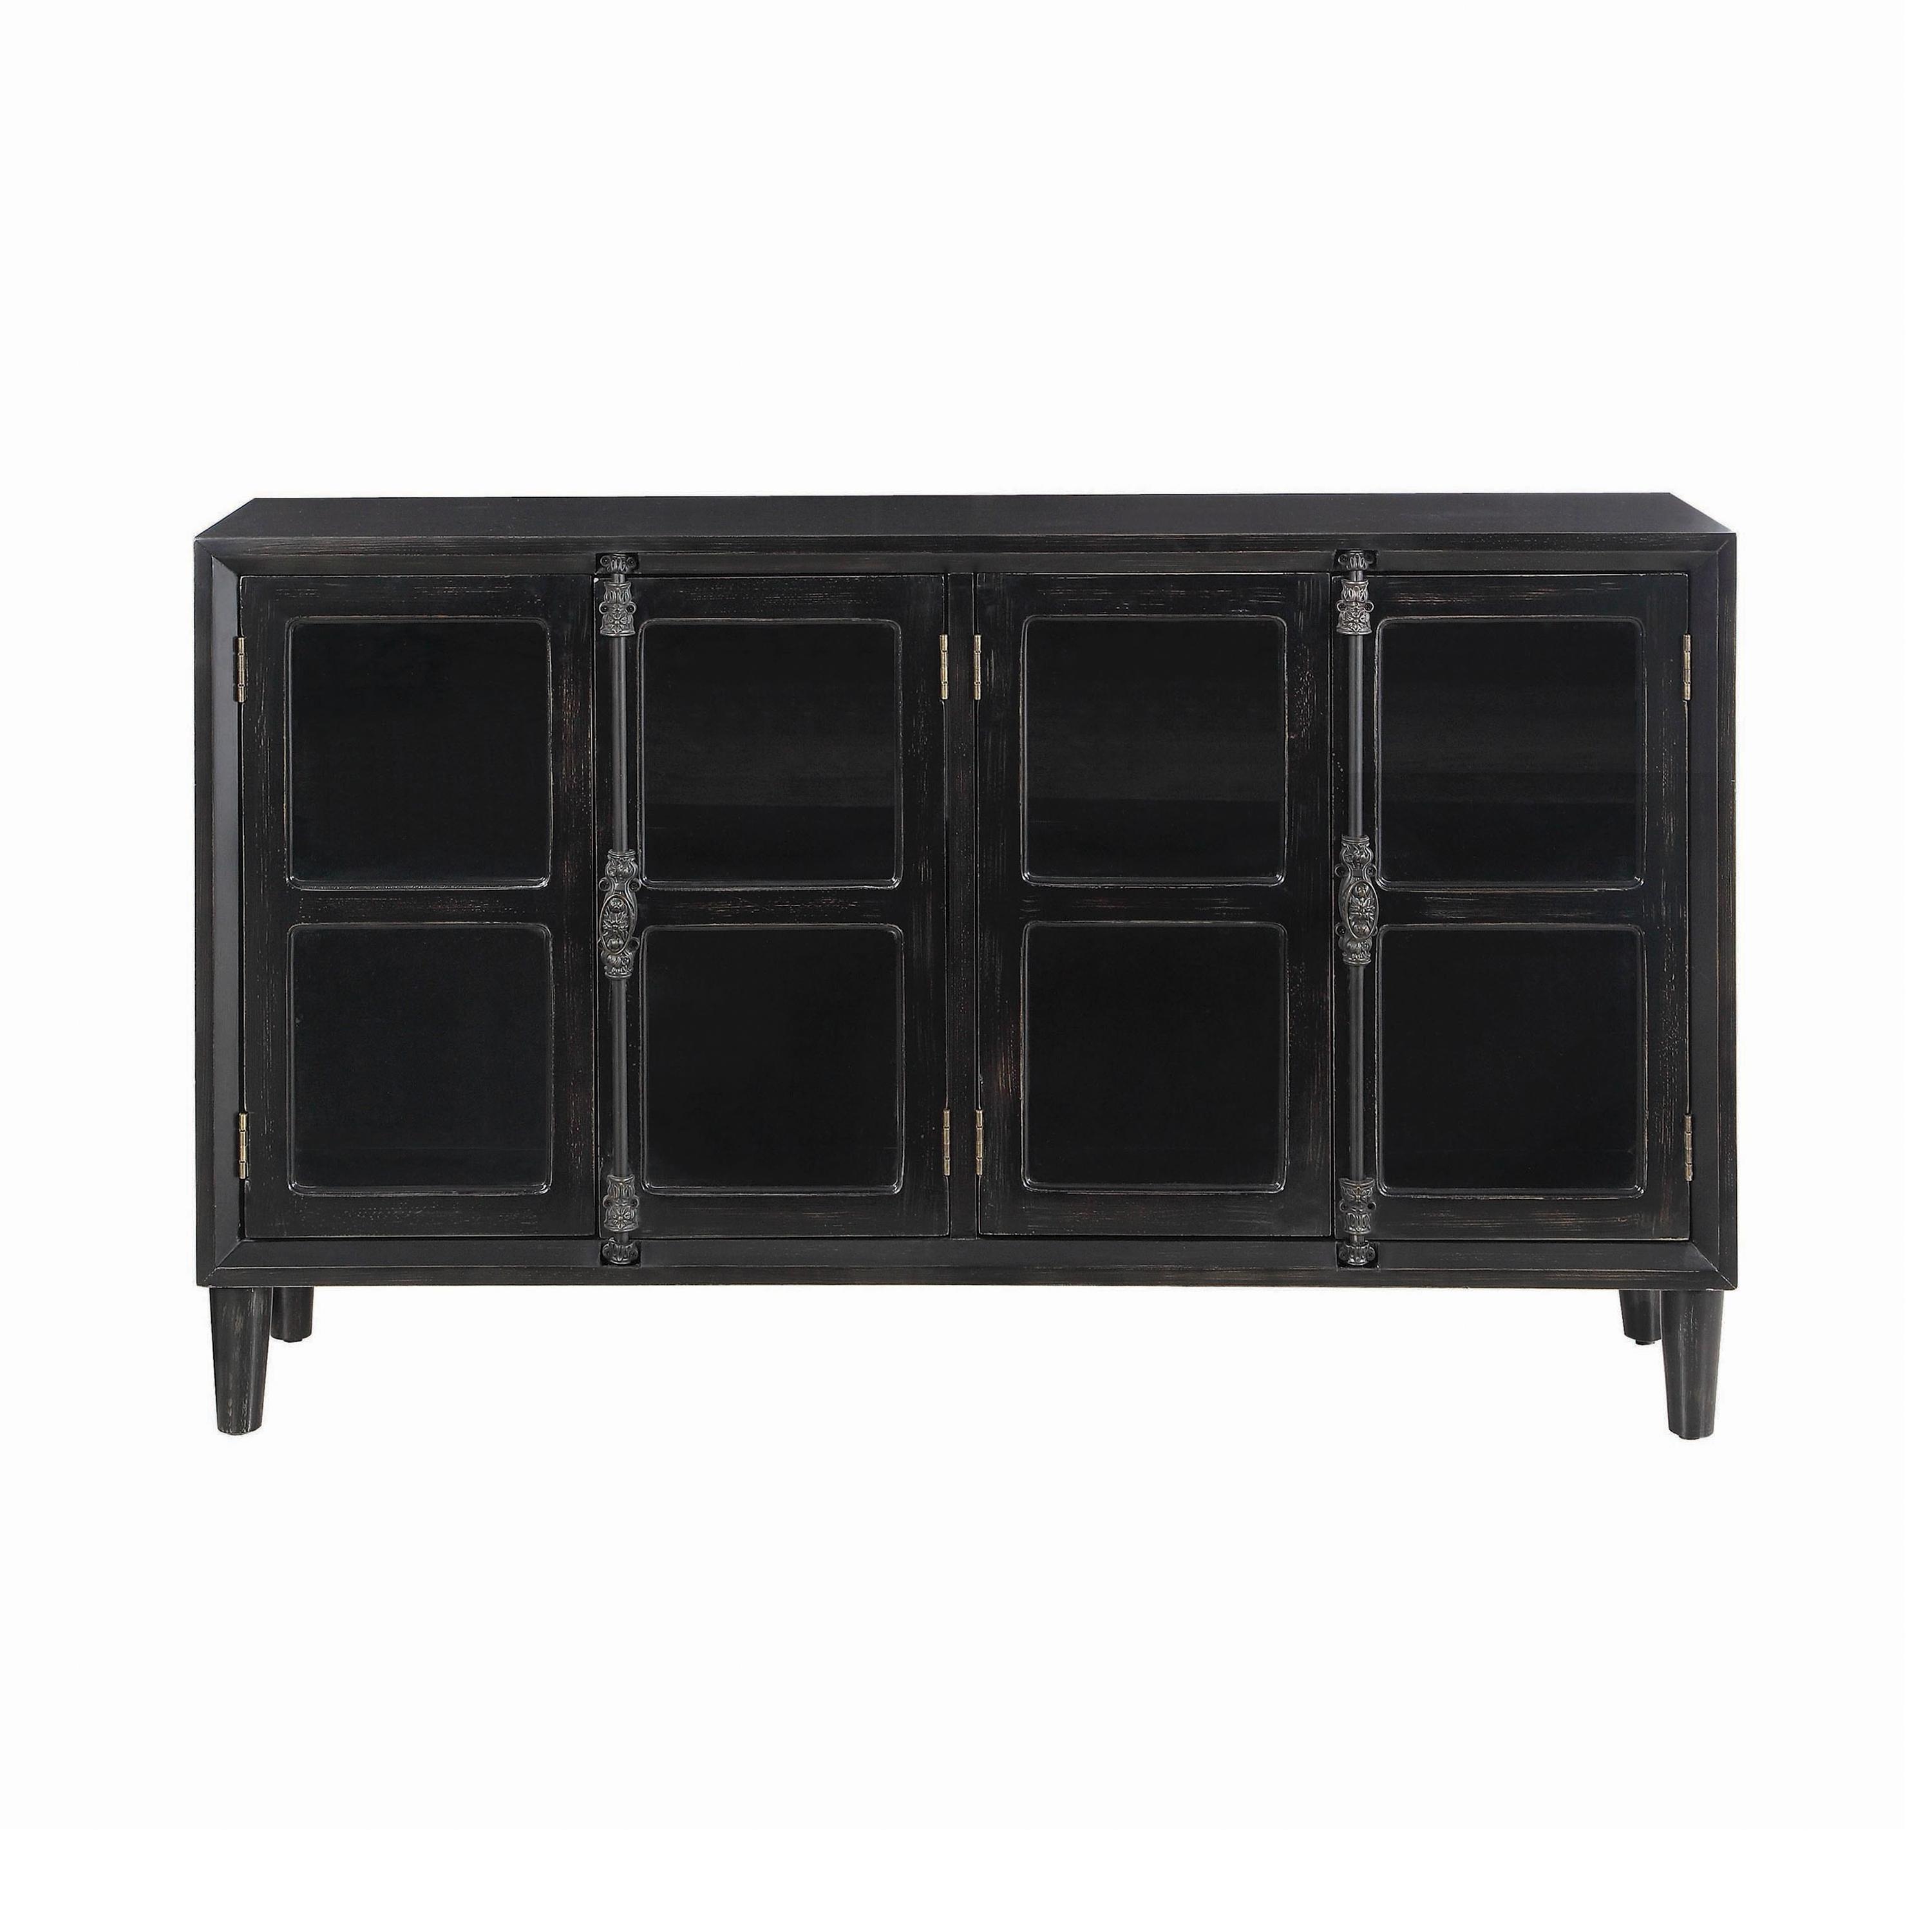 Modern Accent Cabinet 950780 950780 in Black 